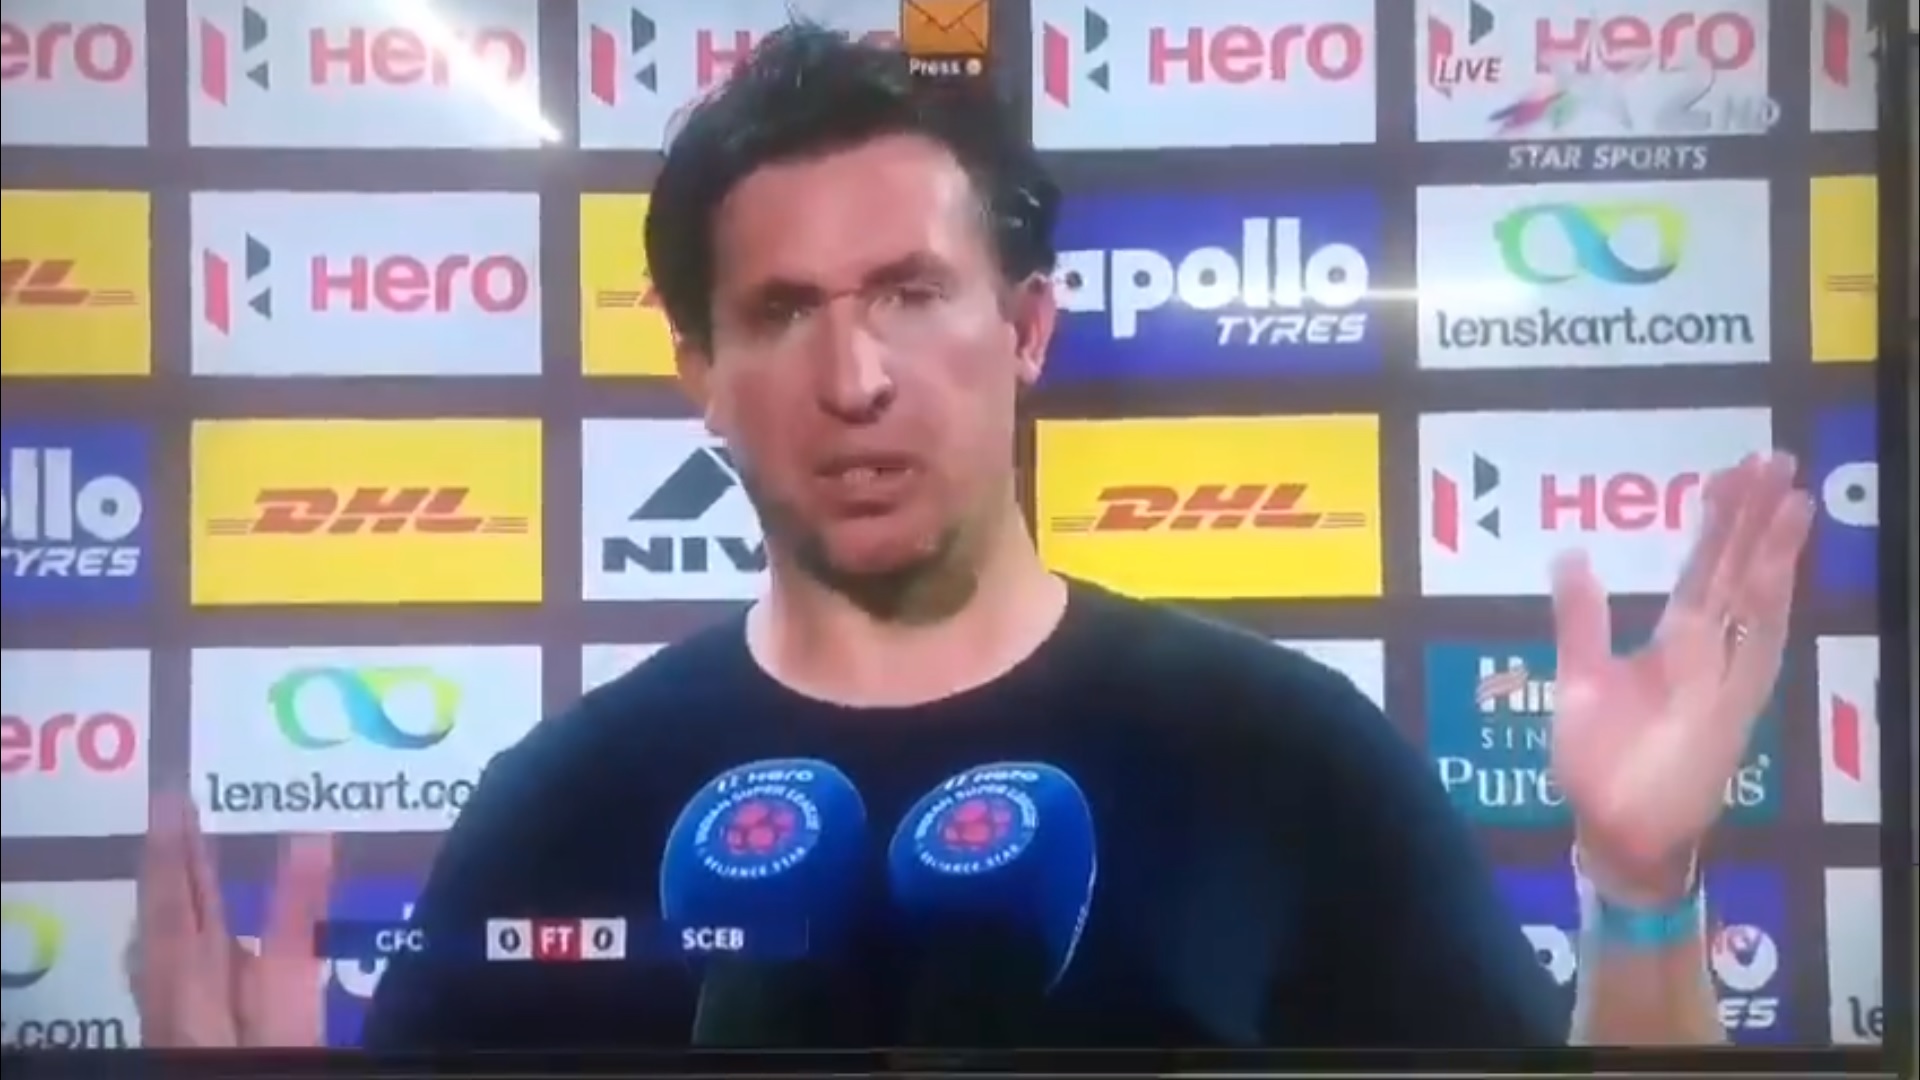 (Video) Robbie Fowler rips into reporter after ‘absolutely disgraceful’ question